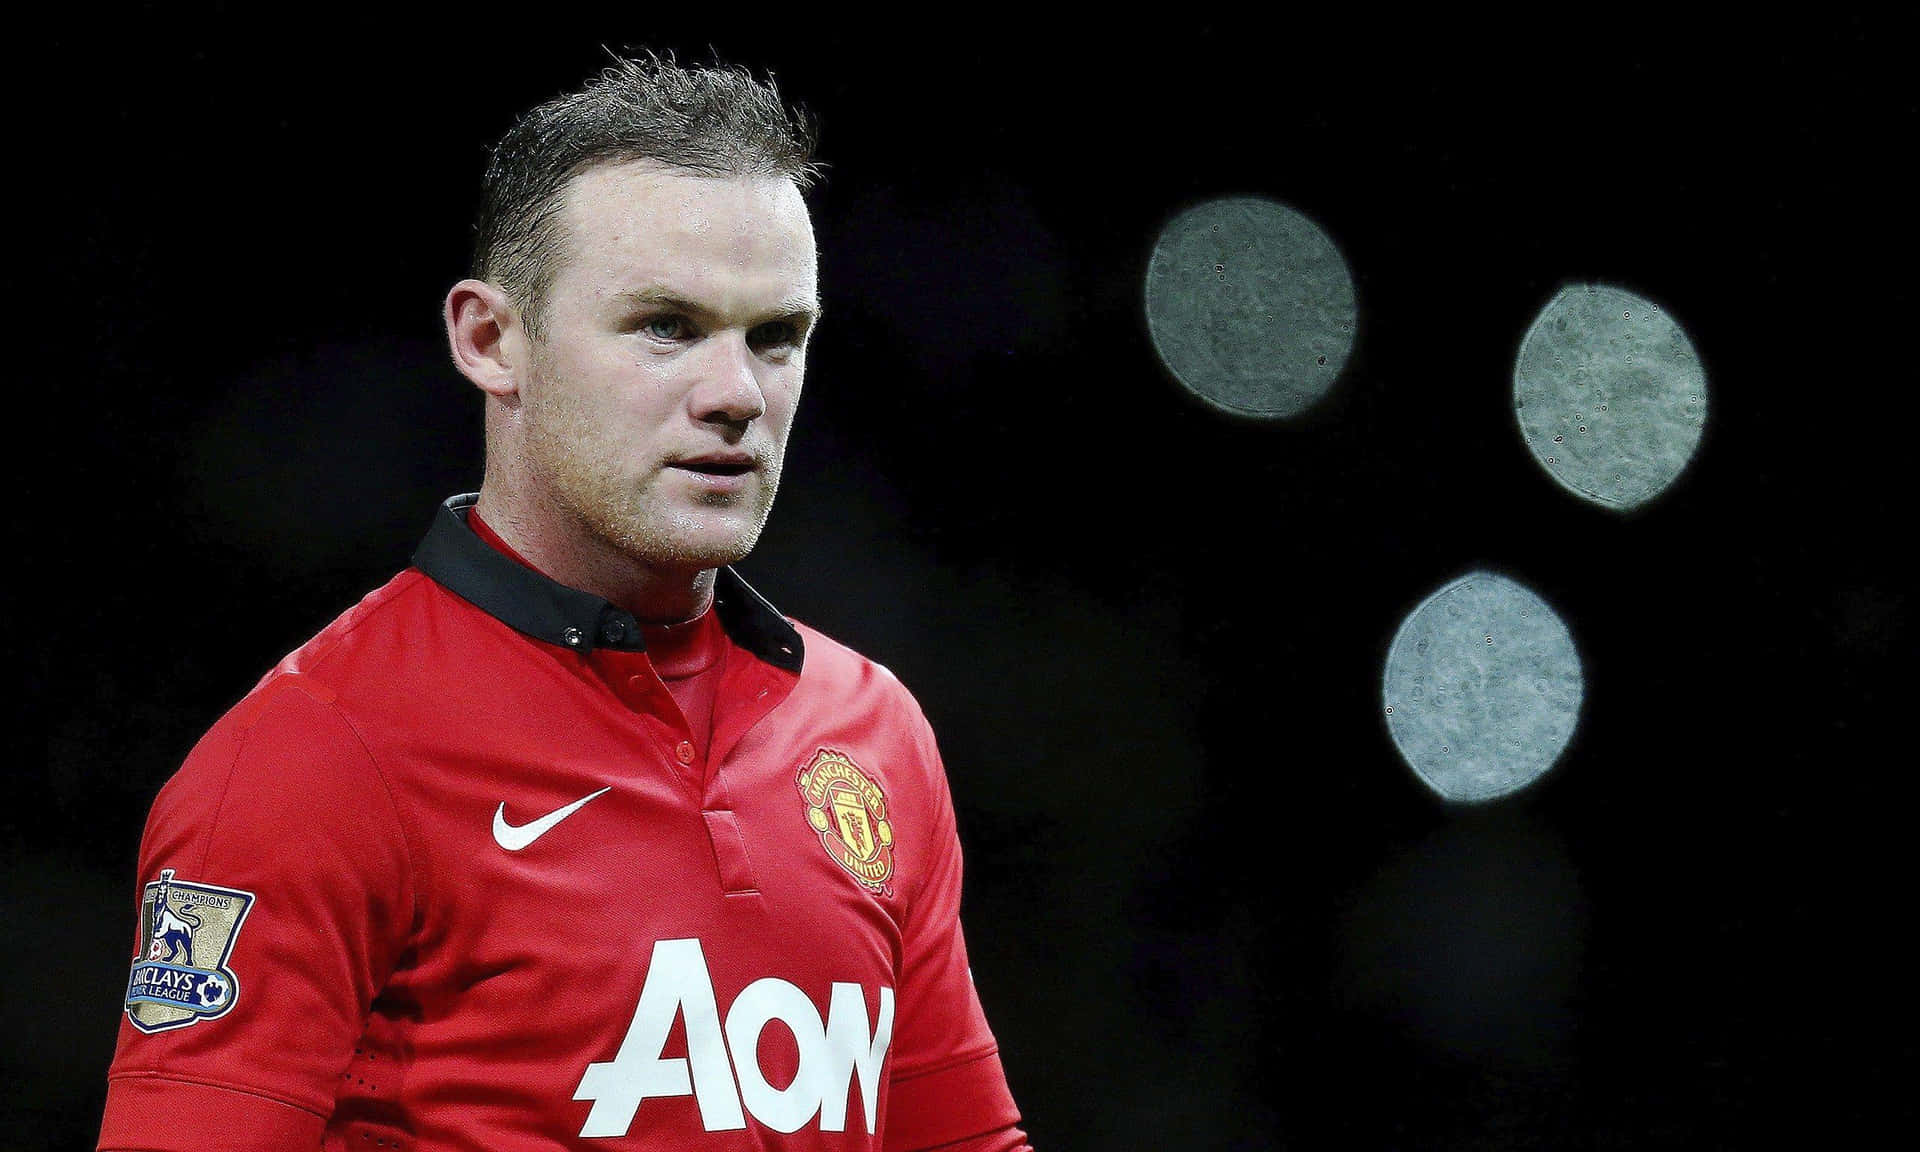 Wayne Rooney Is A Manchester United Player